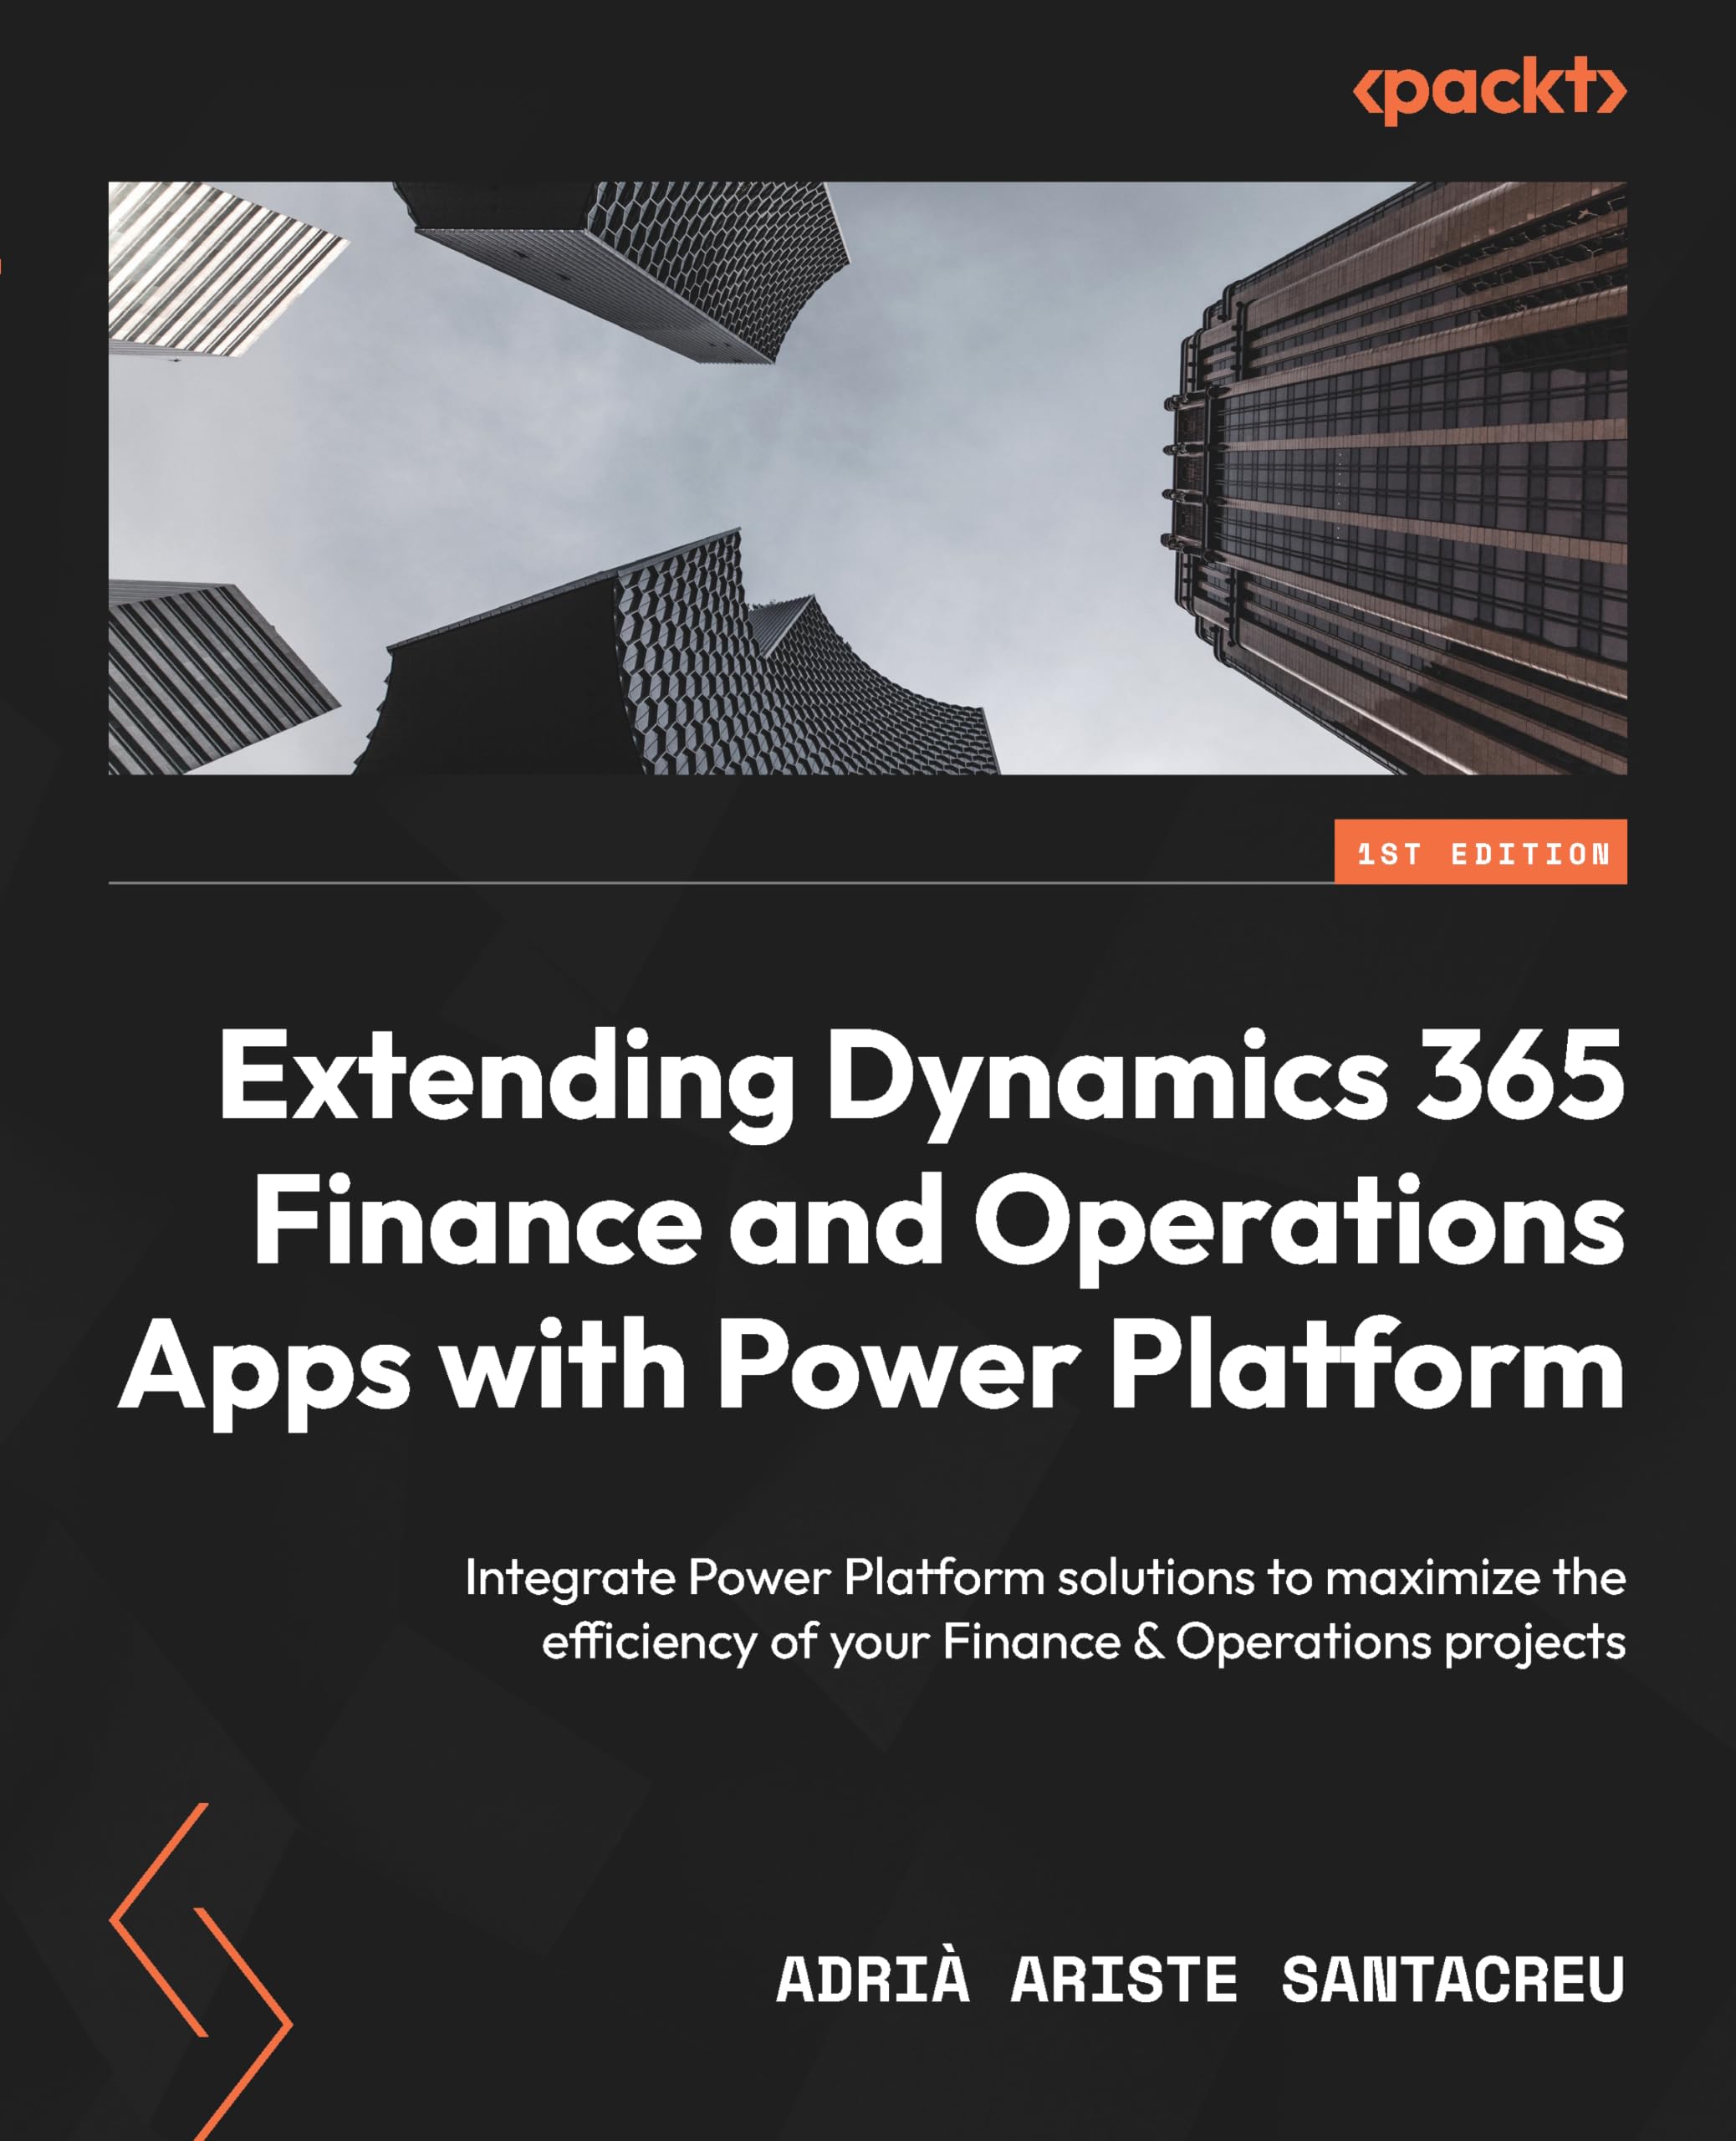 Extending Dynamics 365 Finance and Operations Apps with Power Platform: Integrate Power Platform solutions to maximize the efficiency of your Finance & Operations projects